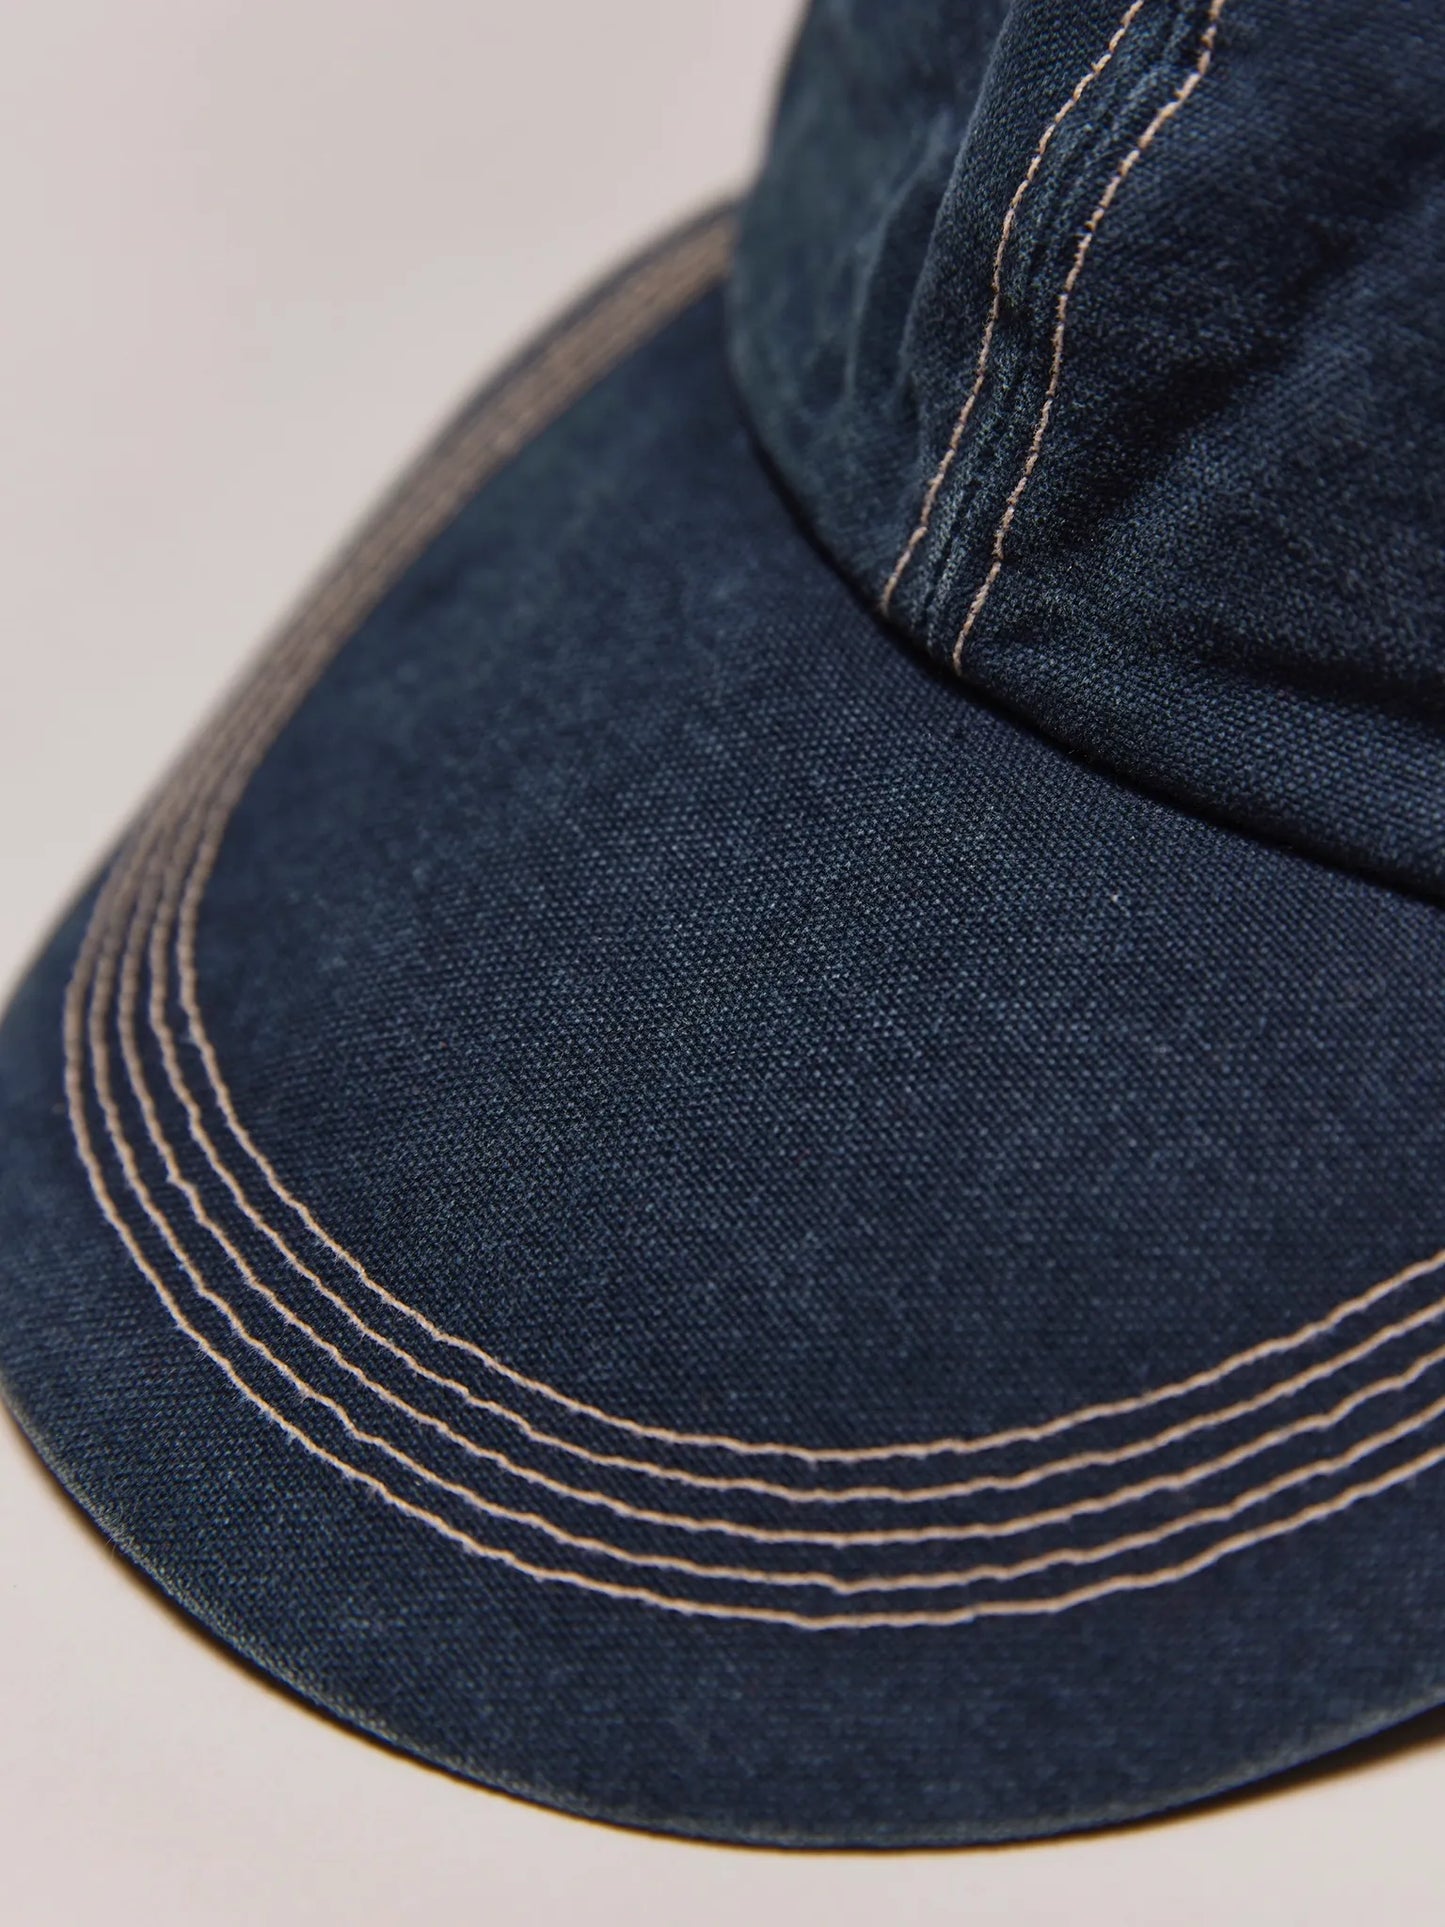 niceness-l-leary-キャンバスロングビルキャップ-navy-2